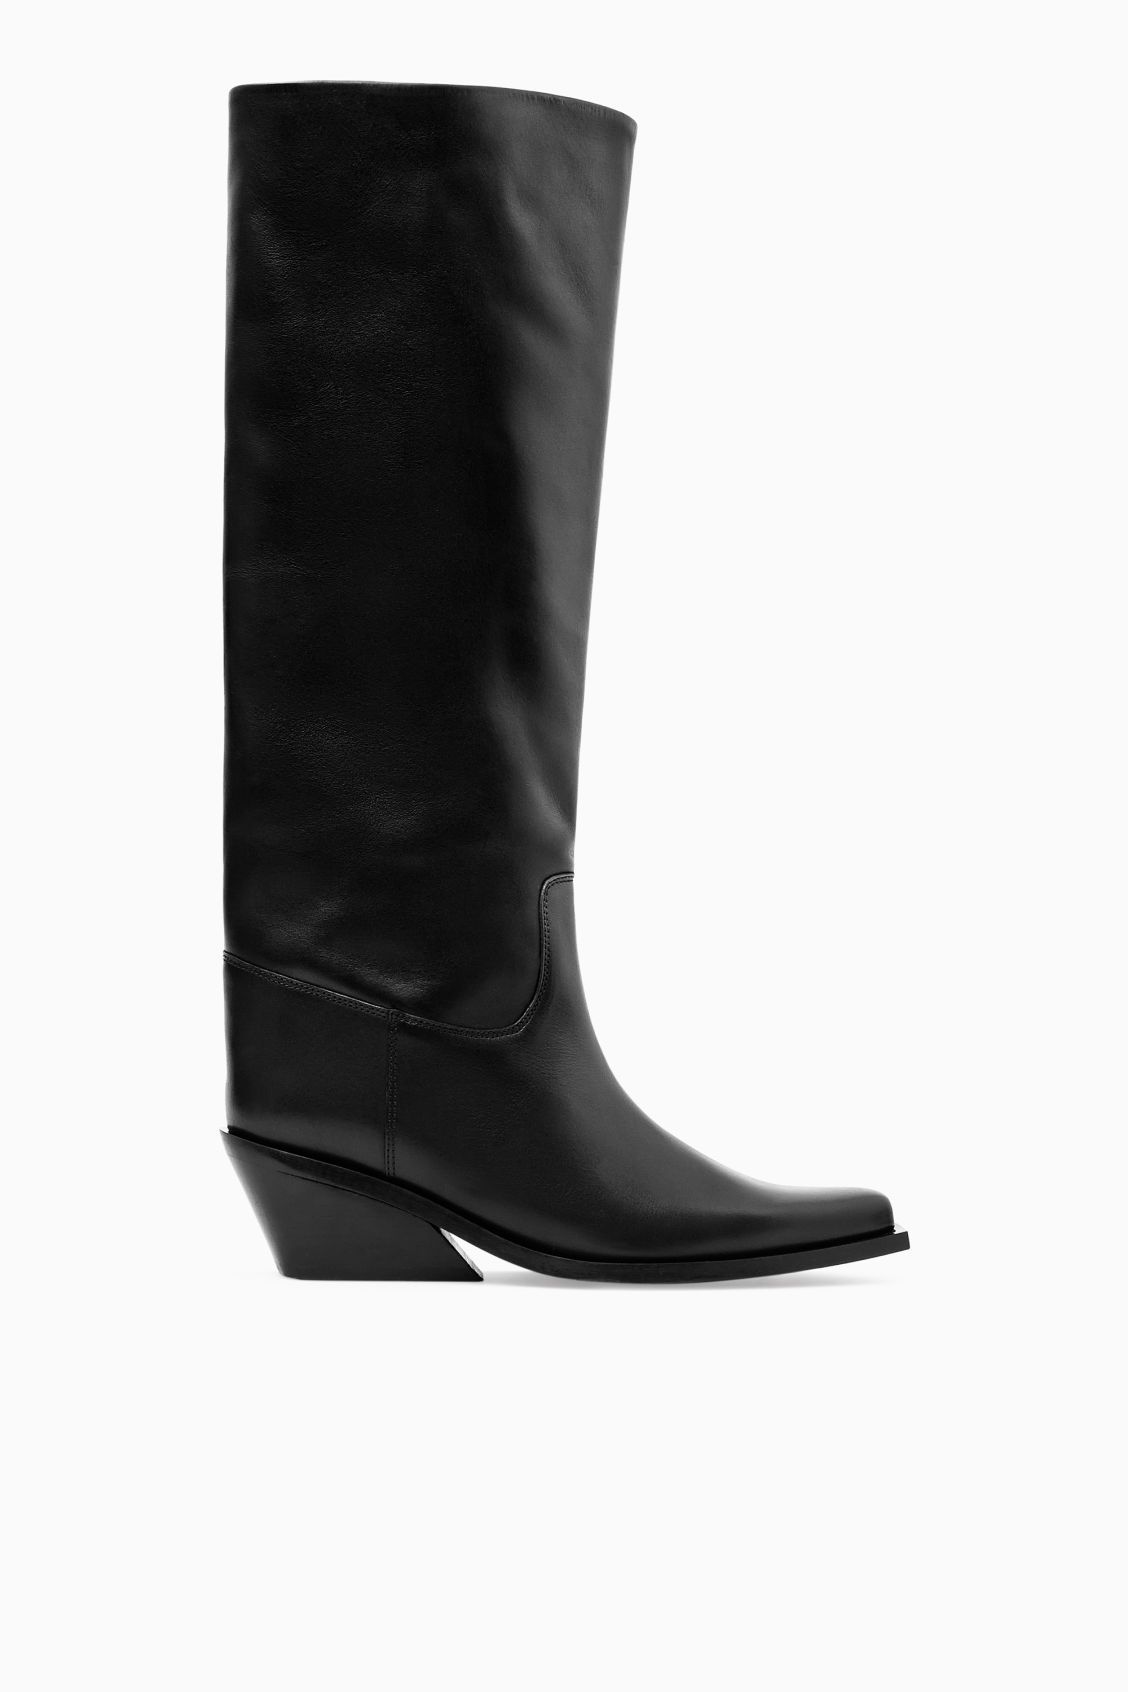 KNEE-HIGH LEATHER COWBOY BOOTS - BLACK - Shoes - COS | COS (US)